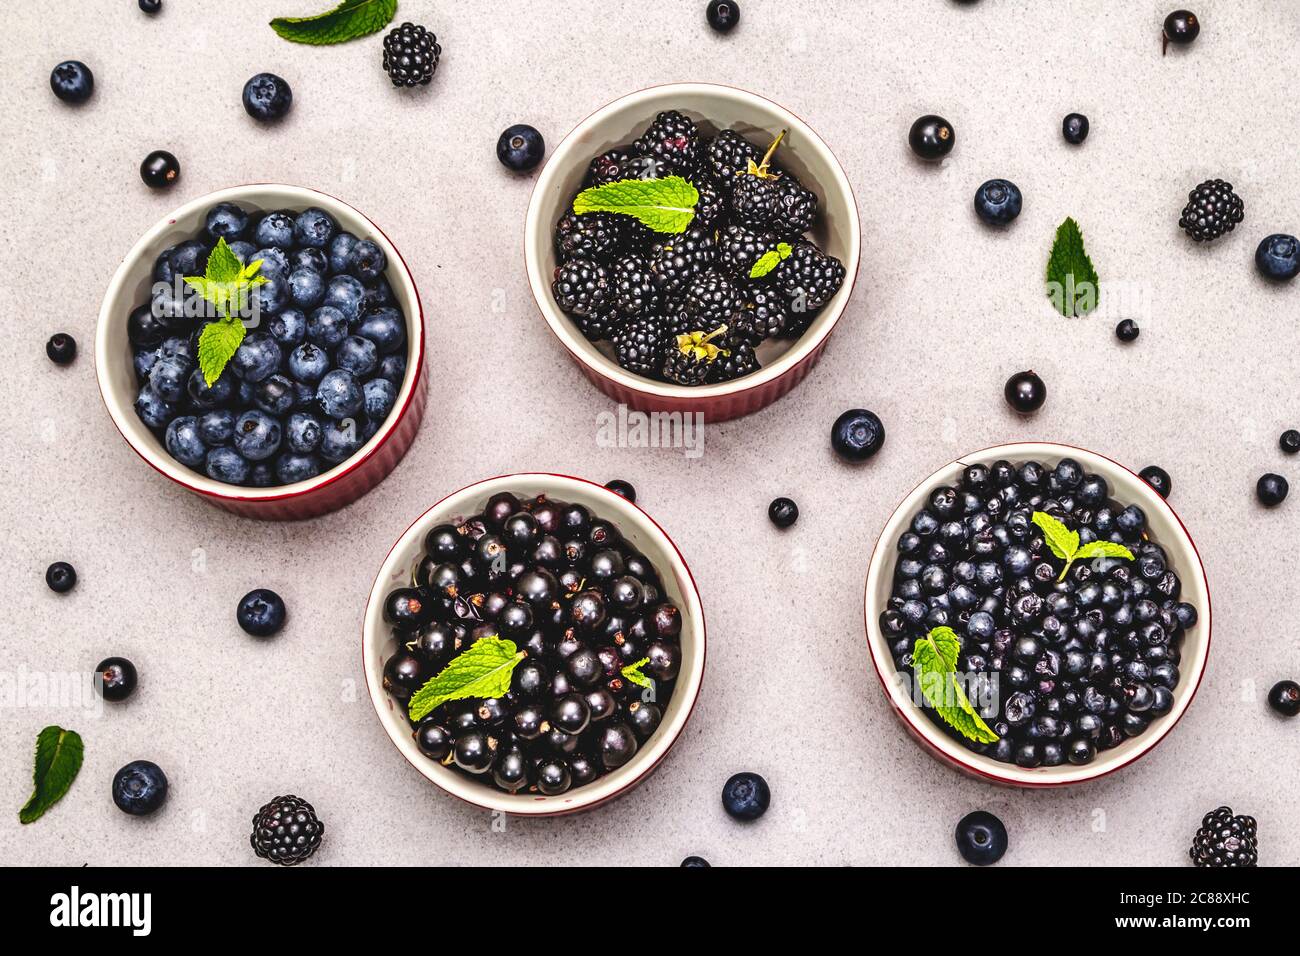 Assorted berries in blue and black colors: bilberry, blueberry, currant and blackberry. Stone concrete background, top view Stock Photo